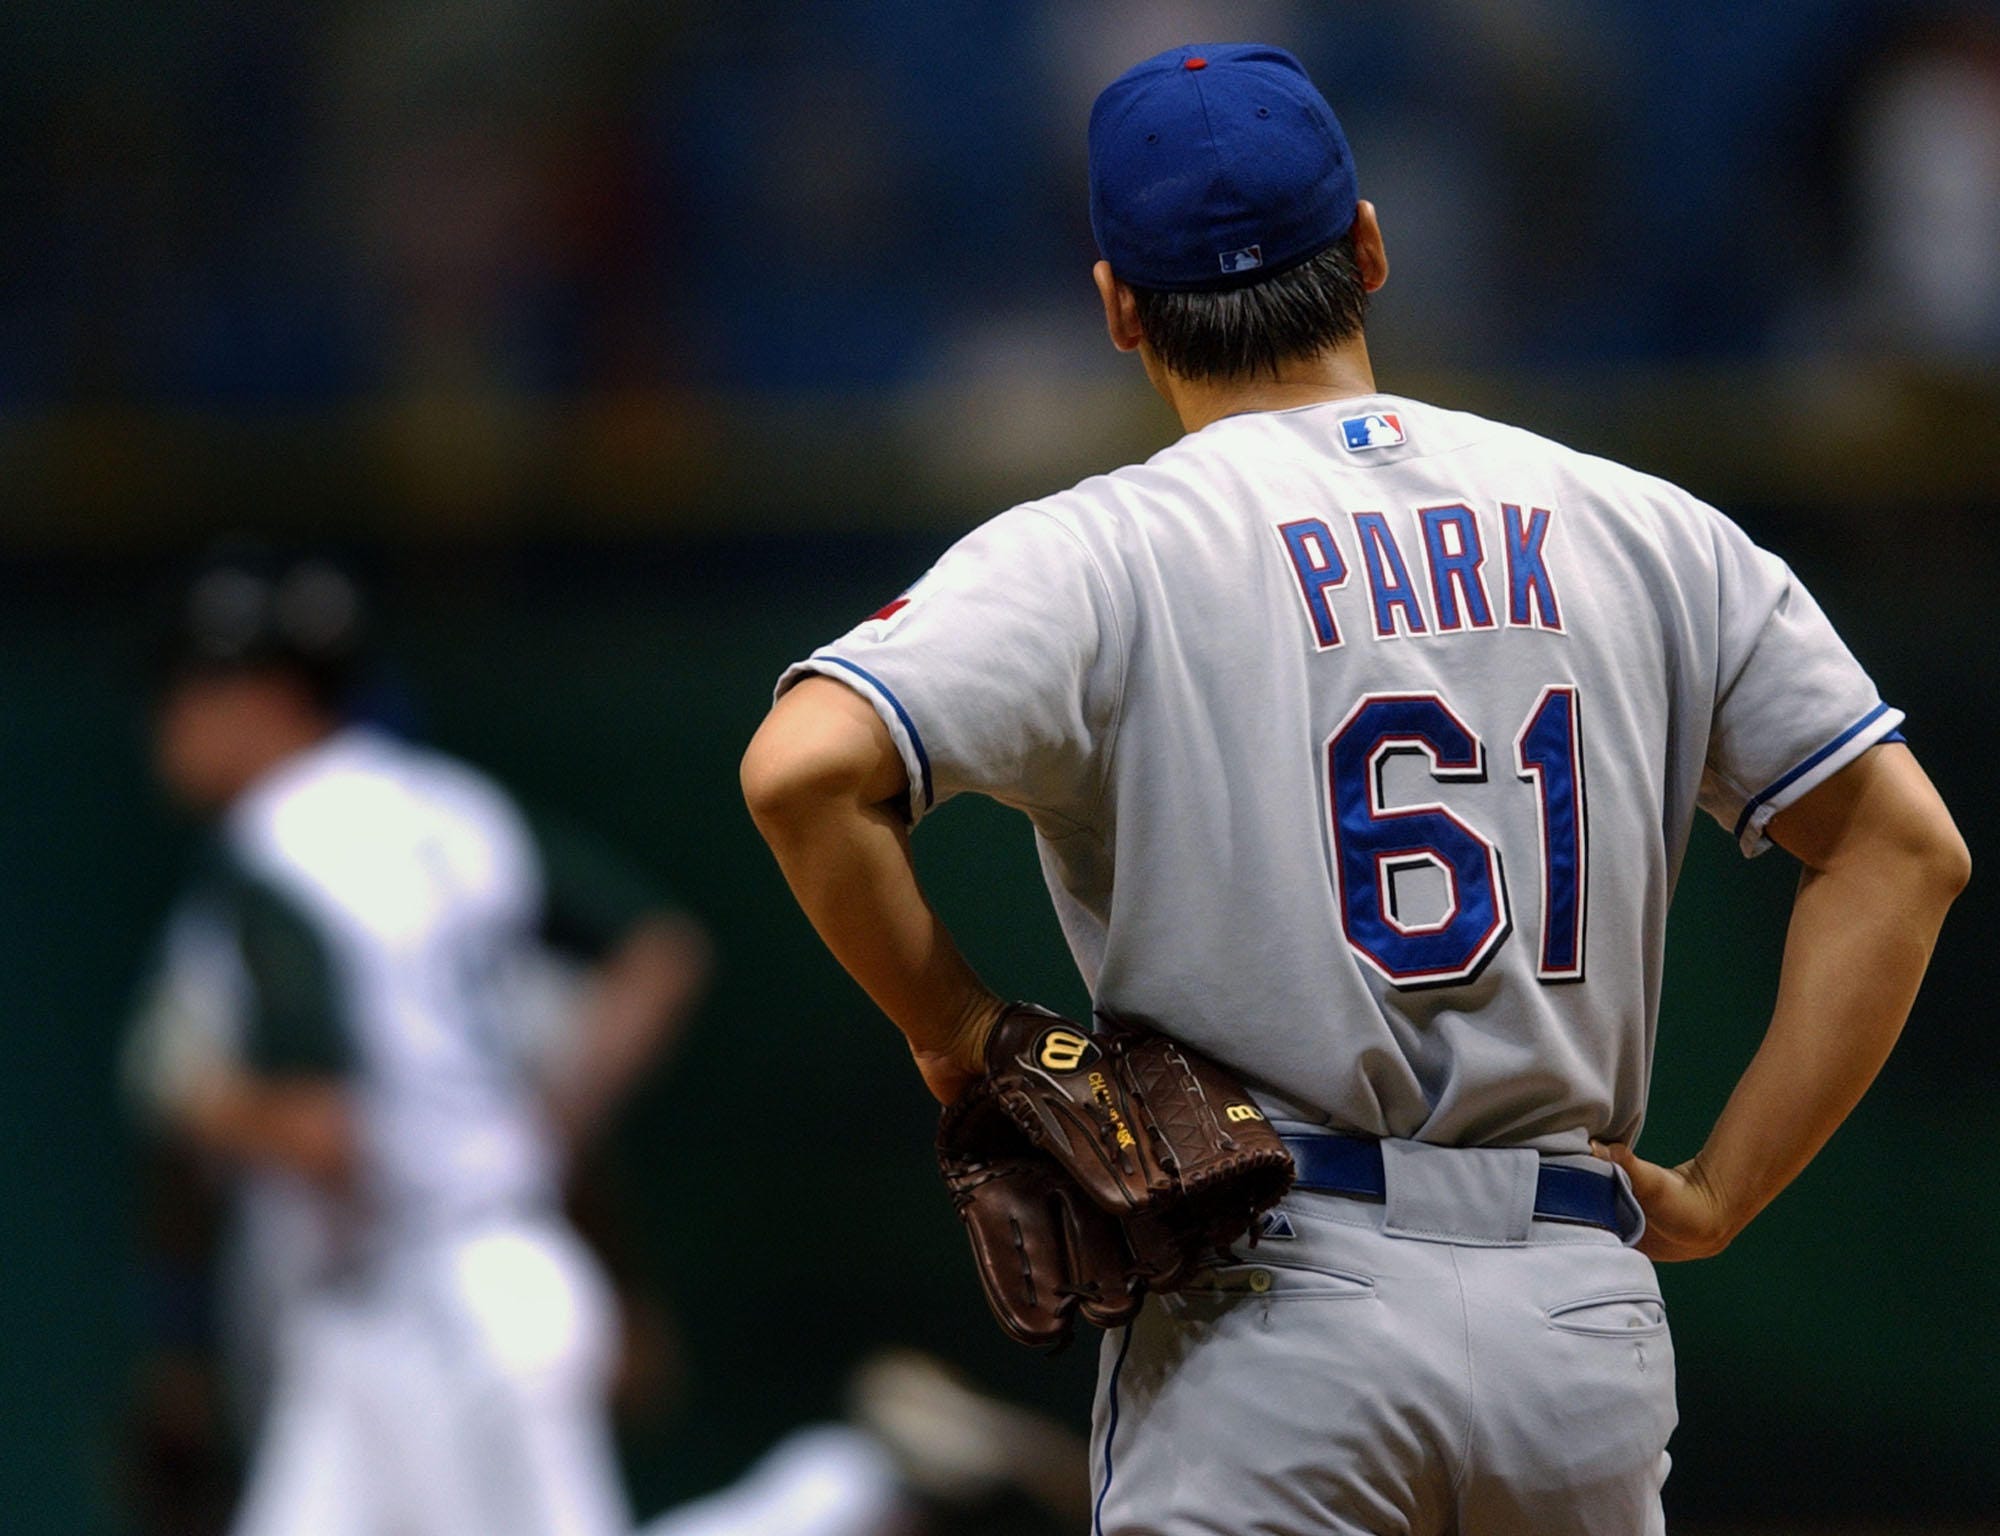 T.R.'s Memoirs: The disastrous Chan Ho Park signing and a long